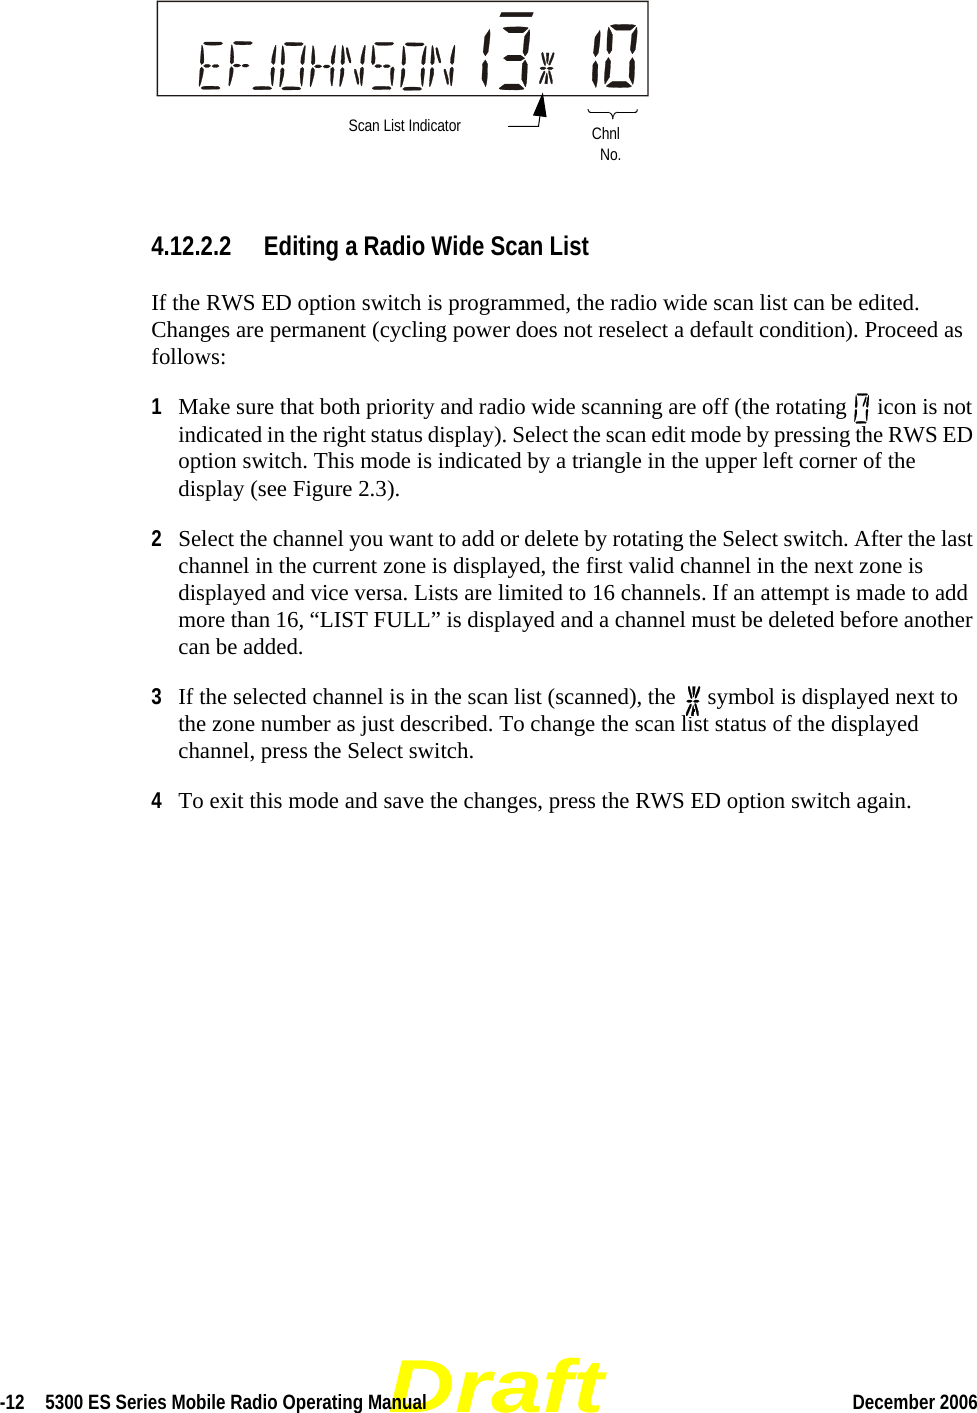 Draft-12  5300 ES Series Mobile Radio Operating Manual December 2006 4.12.2.2 Editing a Radio Wide Scan ListIf the RWS ED option switch is programmed, the radio wide scan list can be edited. Changes are permanent (cycling power does not reselect a default condition). Proceed as follows:1Make sure that both priority and radio wide scanning are off (the rotating   icon is not indicated in the right status display). Select the scan edit mode by pressing the RWS ED option switch. This mode is indicated by a triangle in the upper left corner of the display (see Figure 2.3).2Select the channel you want to add or delete by rotating the Select switch. After the last channel in the current zone is displayed, the first valid channel in the next zone is displayed and vice versa. Lists are limited to 16 channels. If an attempt is made to add more than 16, “LIST FULL” is displayed and a channel must be deleted before another can be added.3If the selected channel is in the scan list (scanned), the   symbol is displayed next to the zone number as just described. To change the scan list status of the displayed channel, press the Select switch. 4To exit this mode and save the changes, press the RWS ED option switch again.Scan List Indicator ChnlNo.